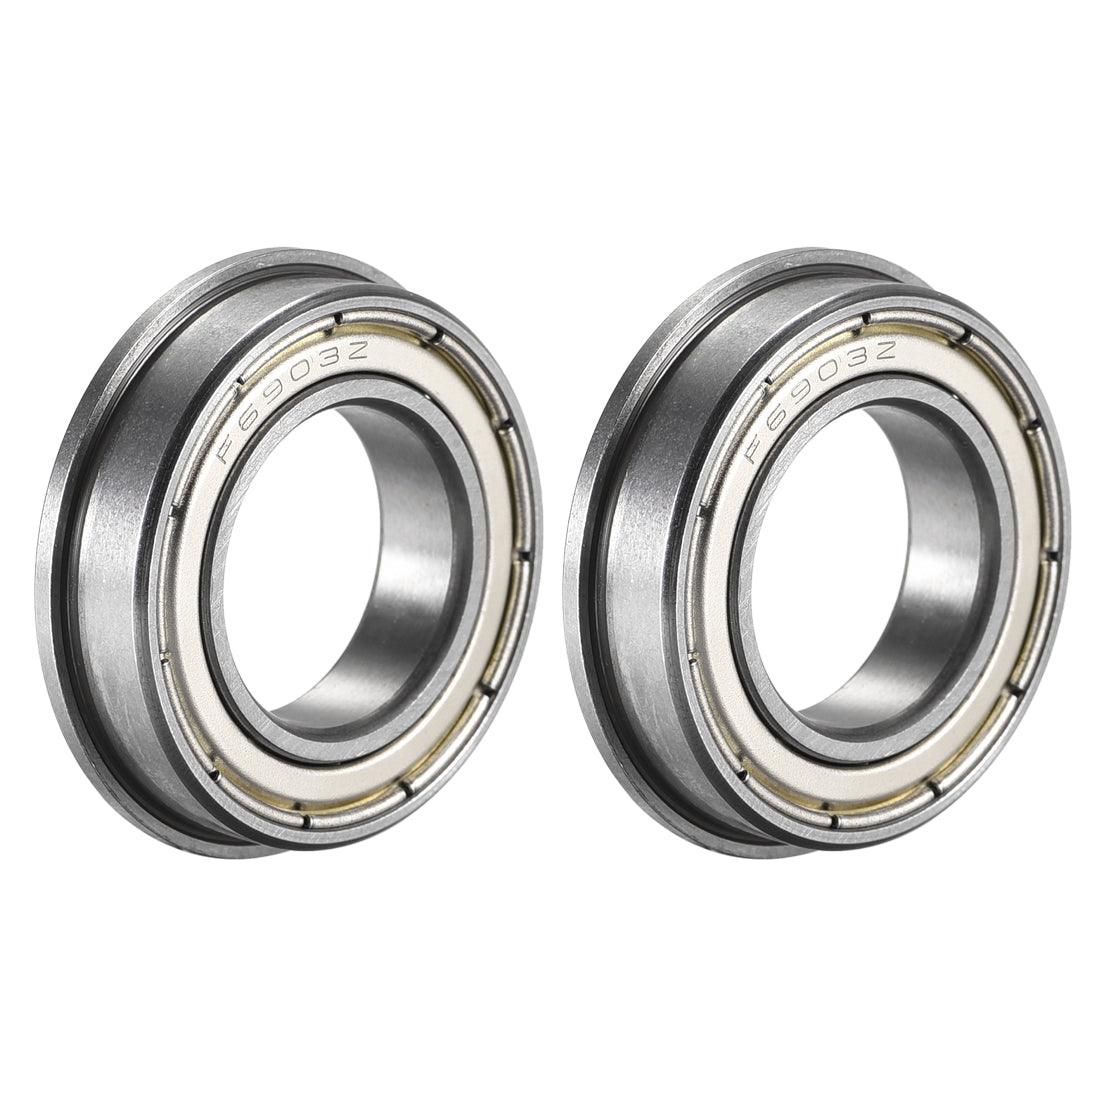 uxcell Uxcell F6903ZZ Flange Ball Bearing 17x30x7mm Double Shielded Chrome Steel Bearings 2pcs